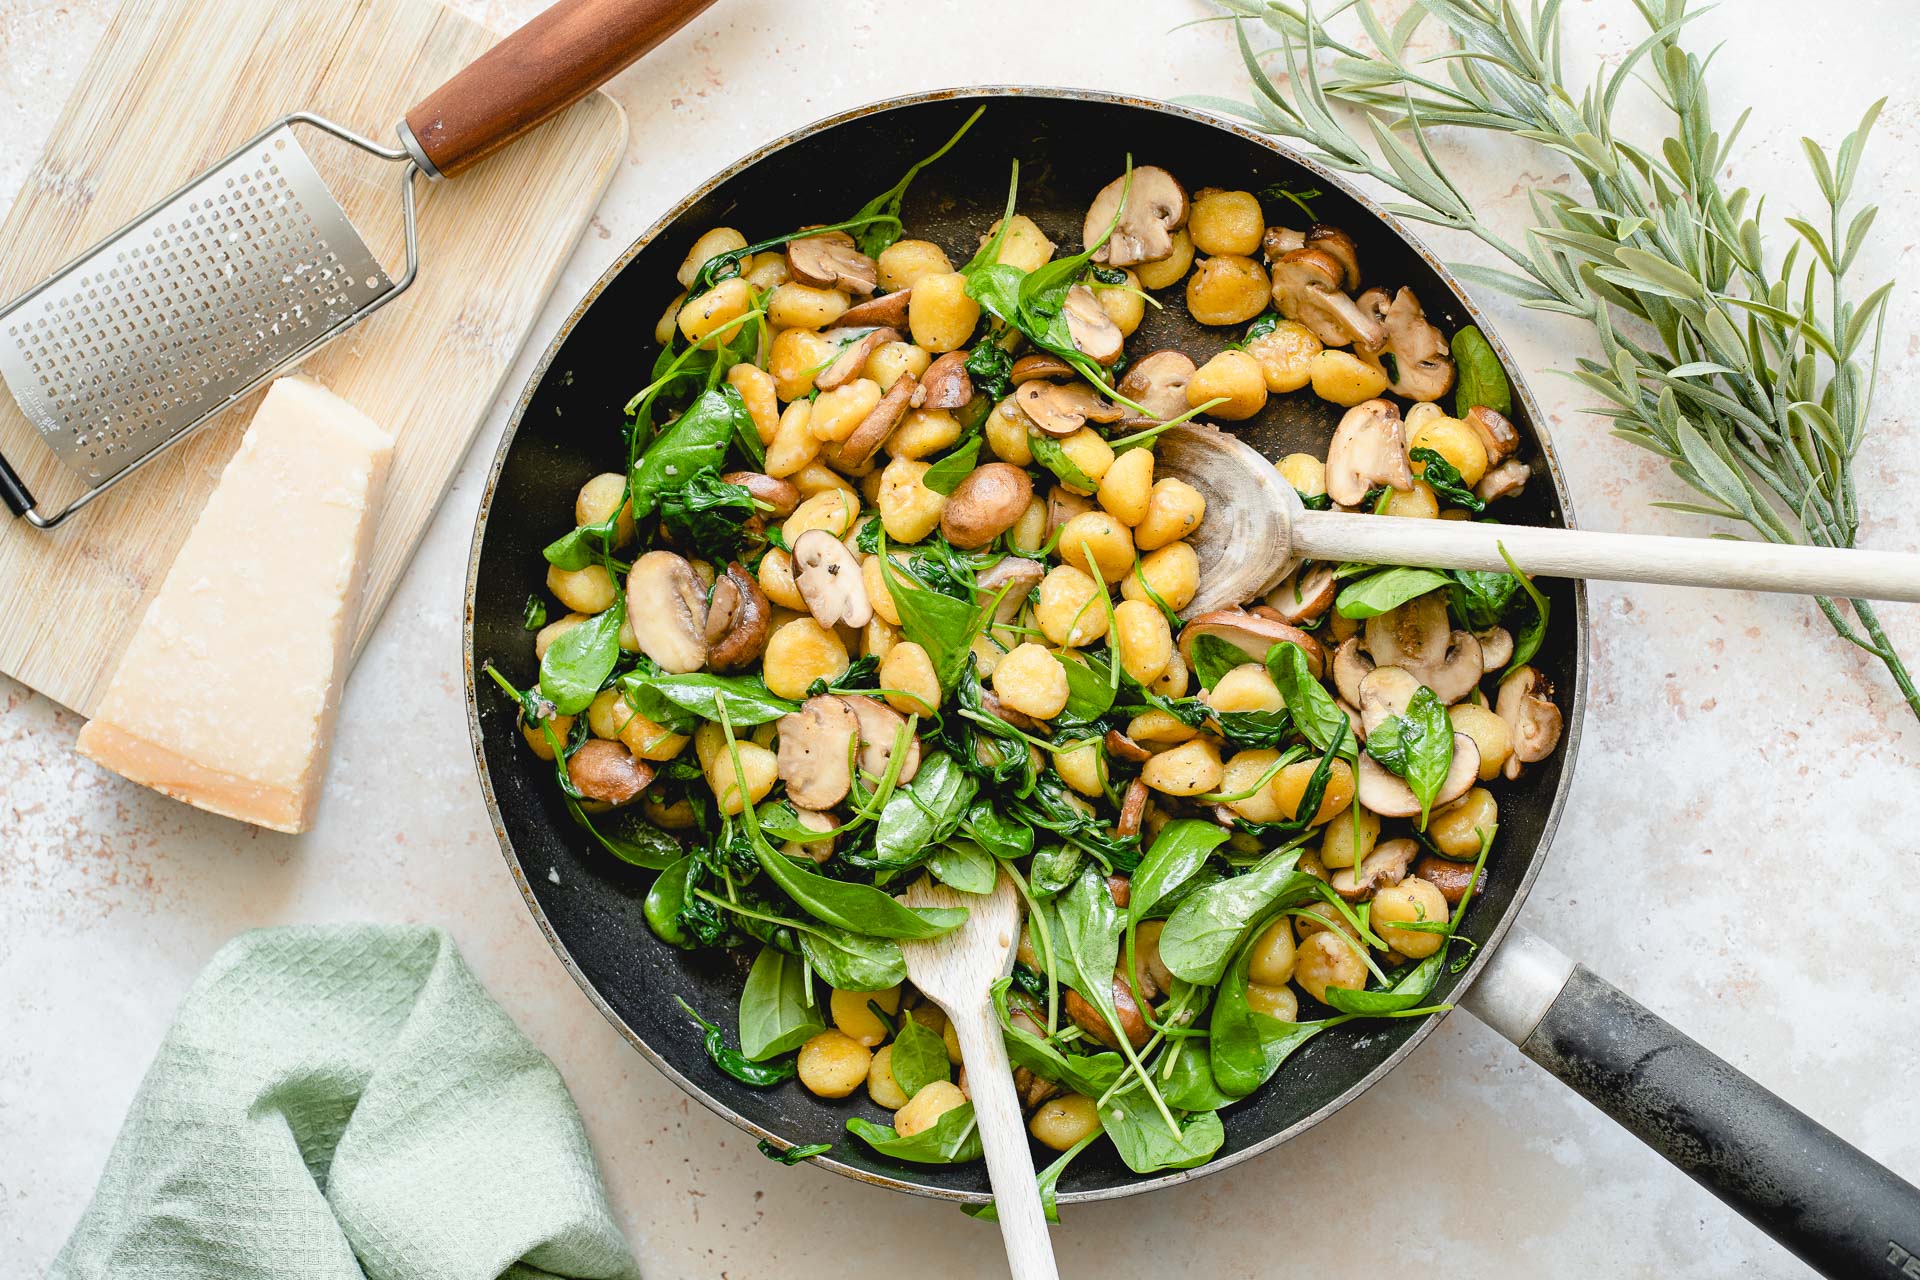 Pan-fried Gnocchi with Mushrooms and Spinach